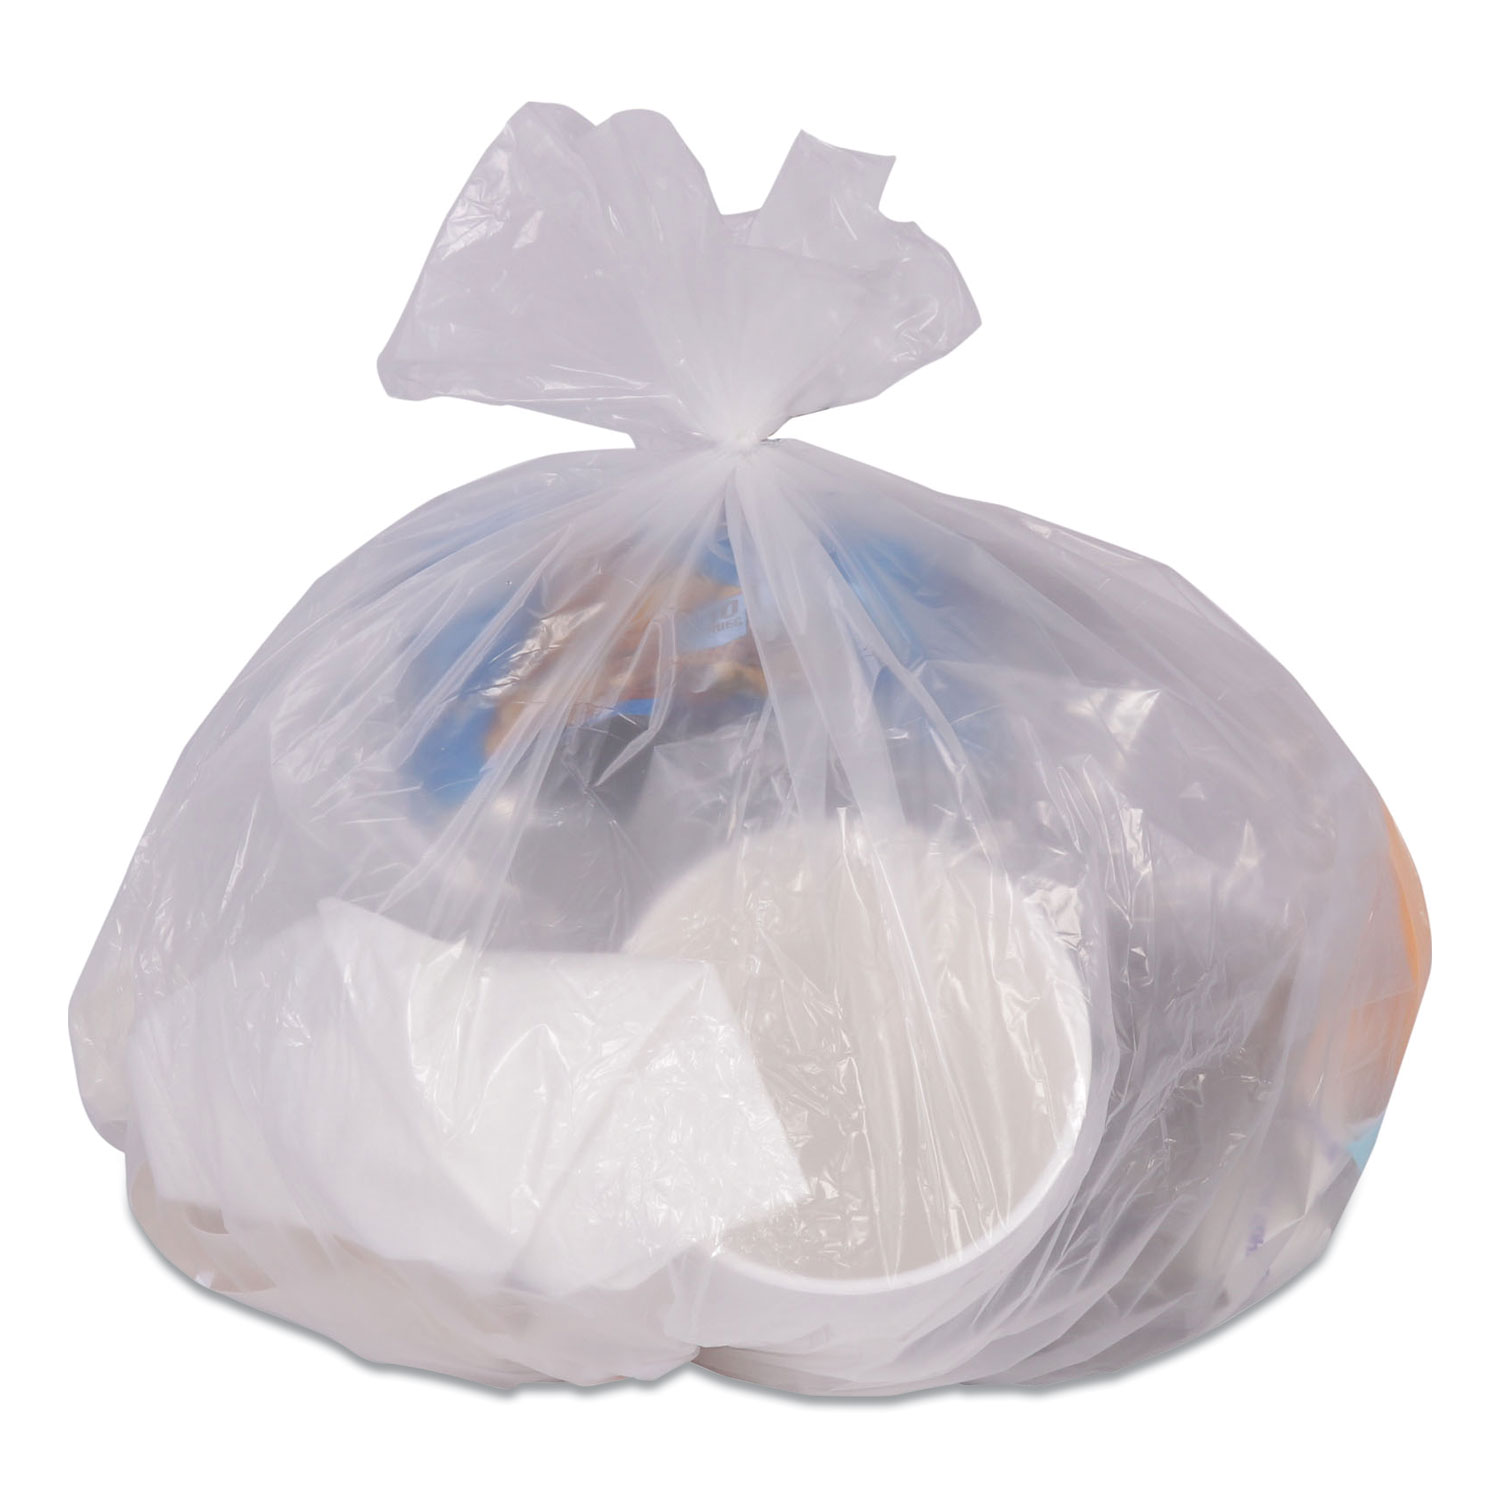 High-Density Can Liners, 10 gal, 8 mic, 24 x 24, Natural, 50 Bags/Roll,  20 Rolls/Carton - Office Source 360